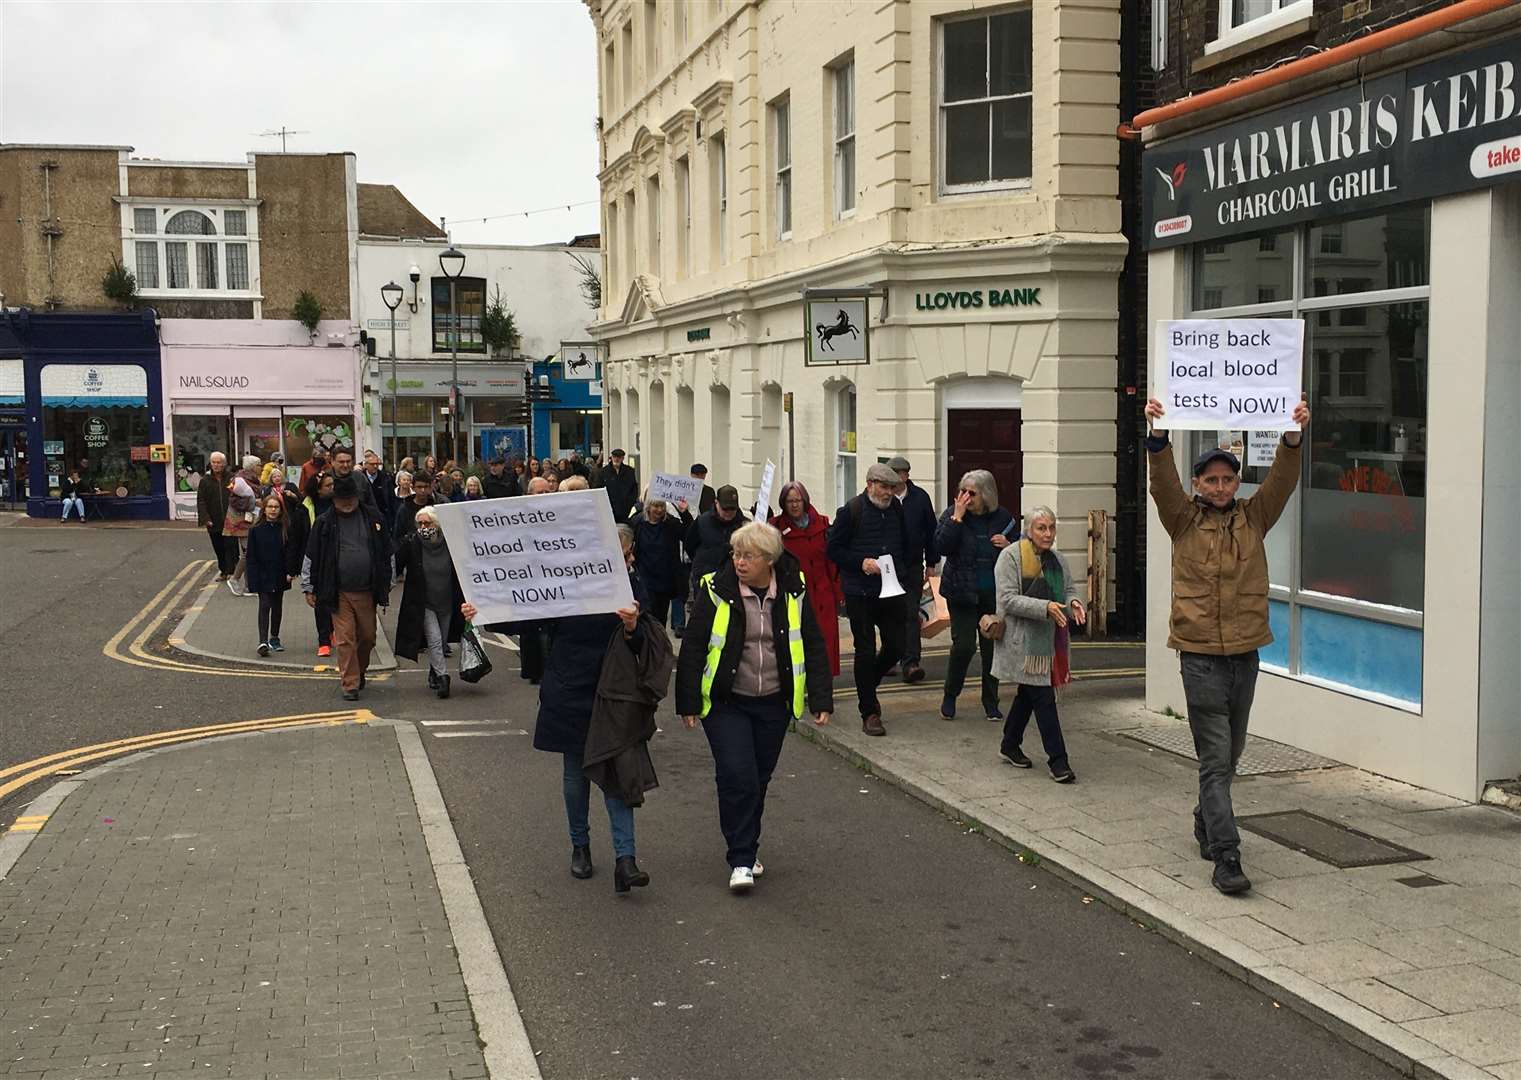 Protesters met at Deal pier last year to campaign against the closure of blood tests at Deal hospital. Photo: Tony Grist